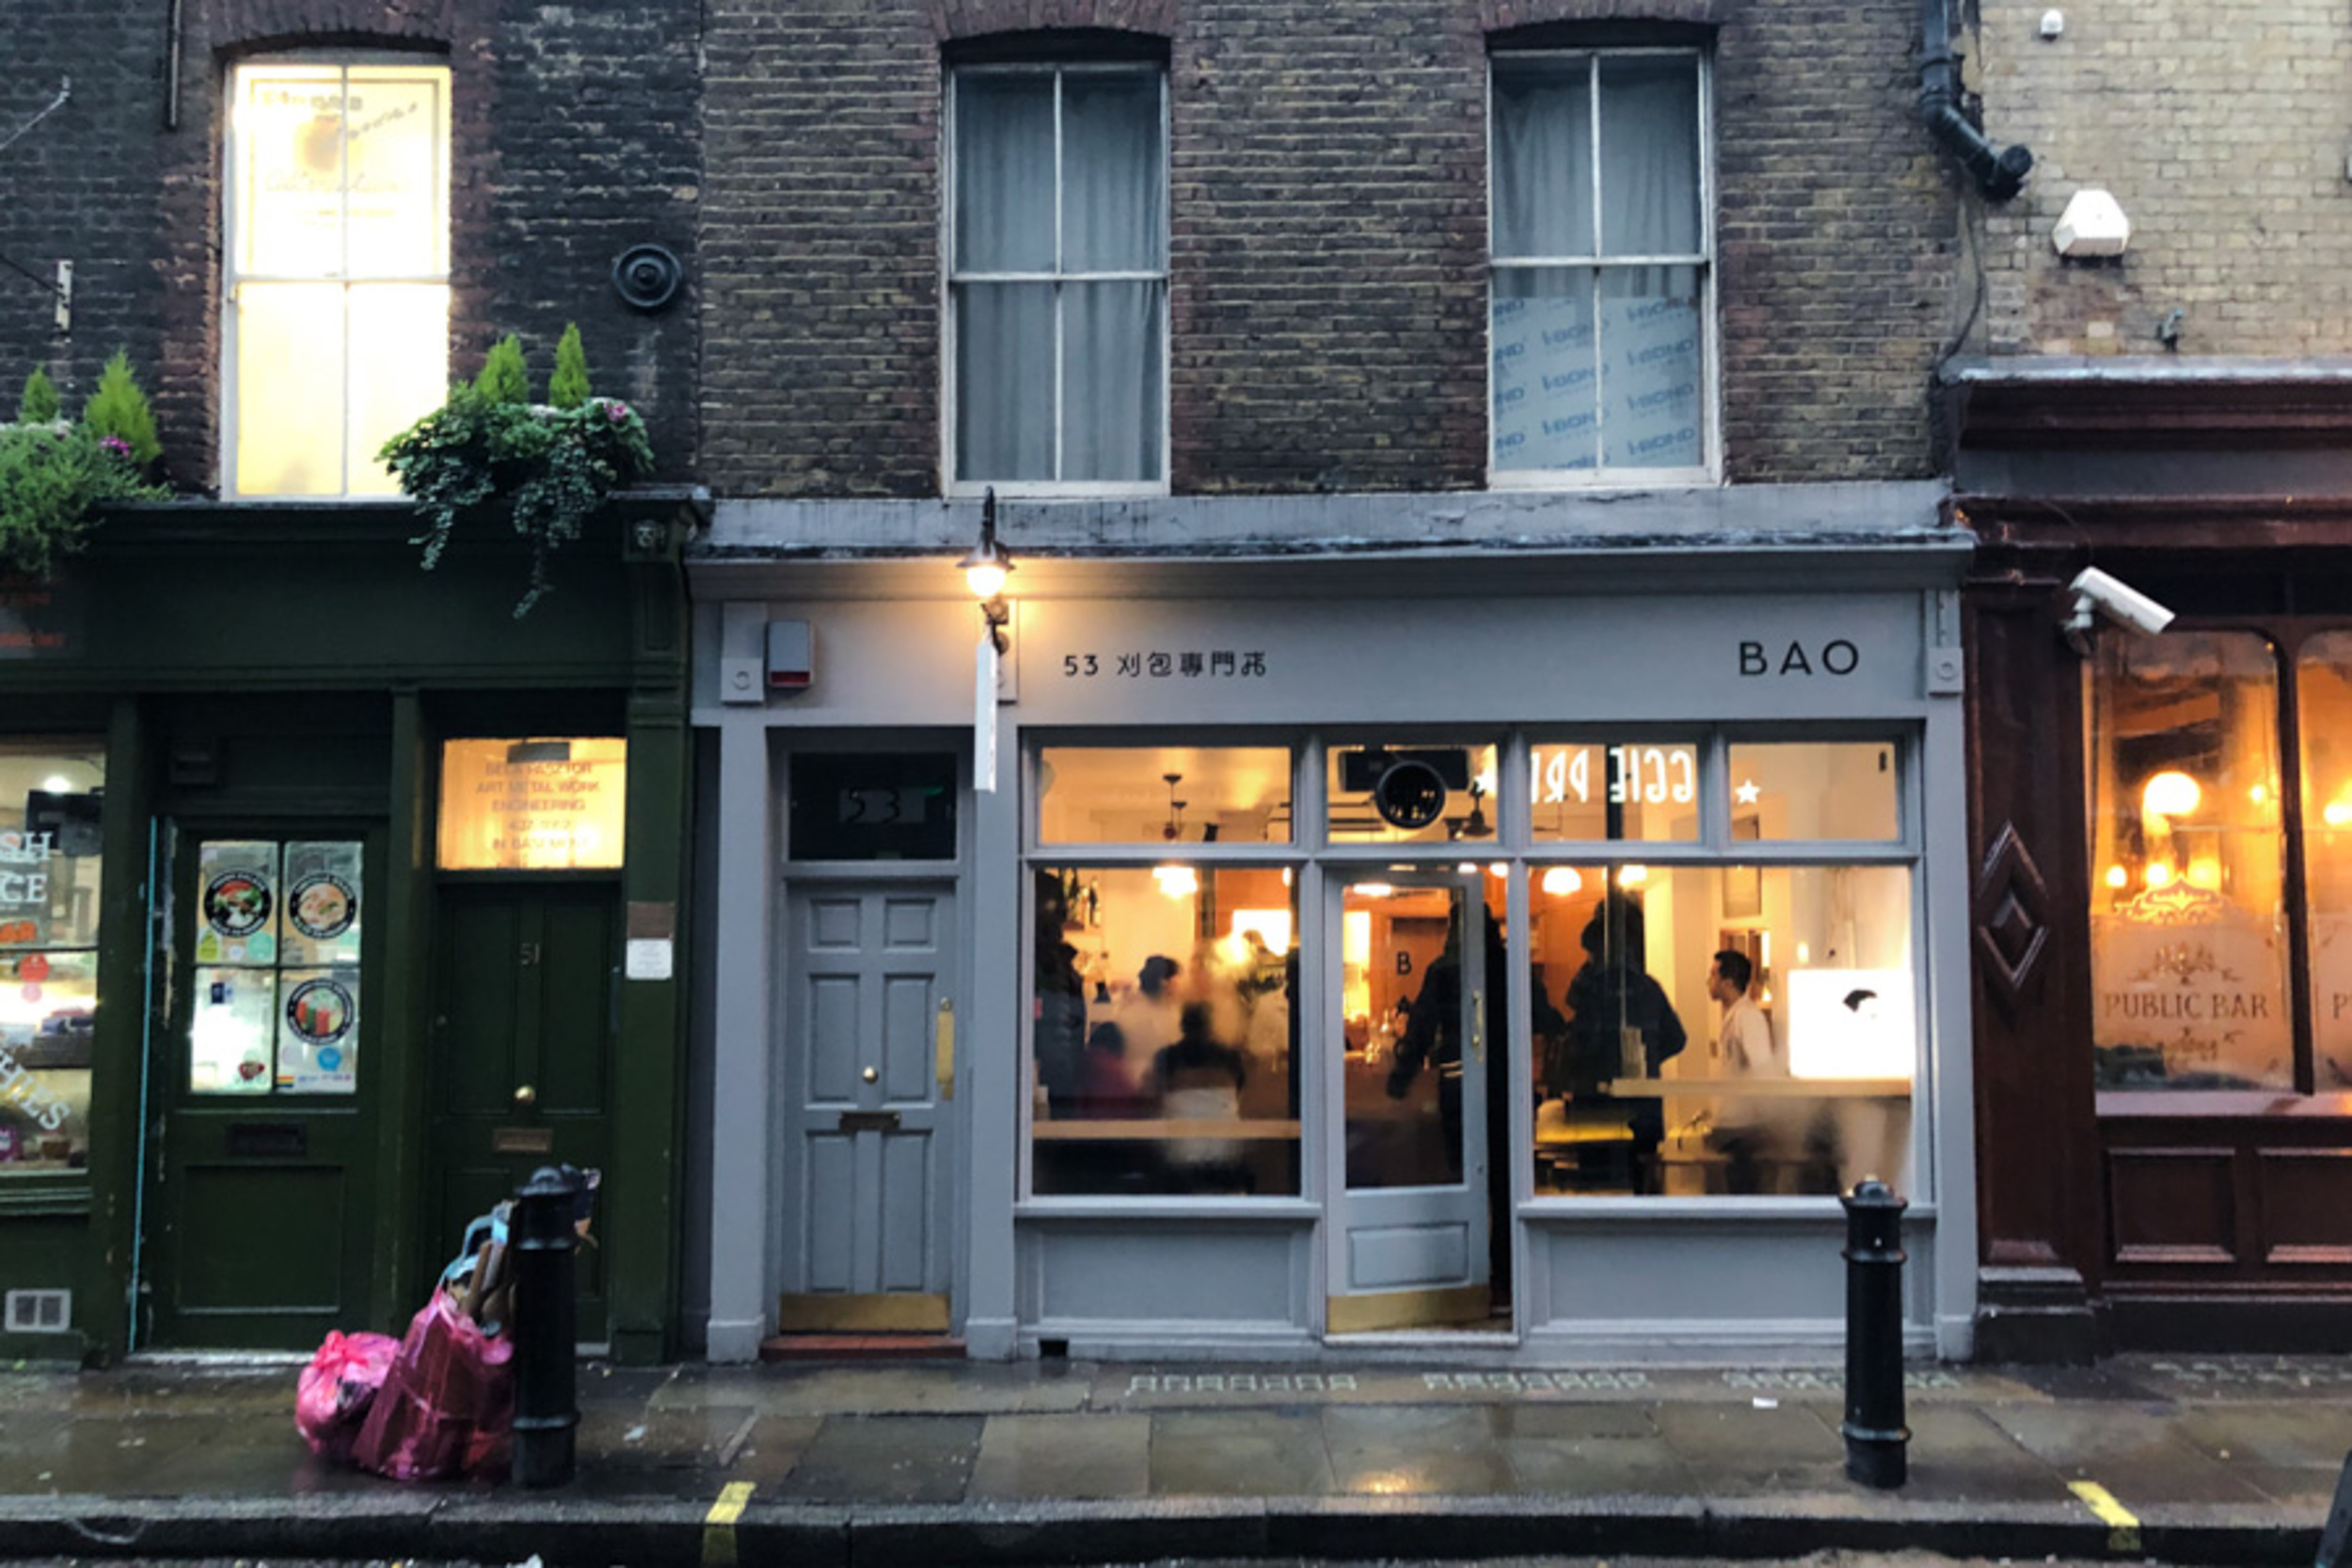 <p>You can't go drinking on an empty stomach, though. Start your night in Soho with a meal at Bao, a Taiwanese restaurant with some of the best bao this side of Taipei. </p><p><a href='https://www.msn.com/en-us/community/channel/vid-cj9pqbr0vn9in2b6ddcd8sfgpfq6x6utp44fssrv6mc2gtybw0us'>Follow us on MSN to see more of our exclusive lifestyle content.</a></p>